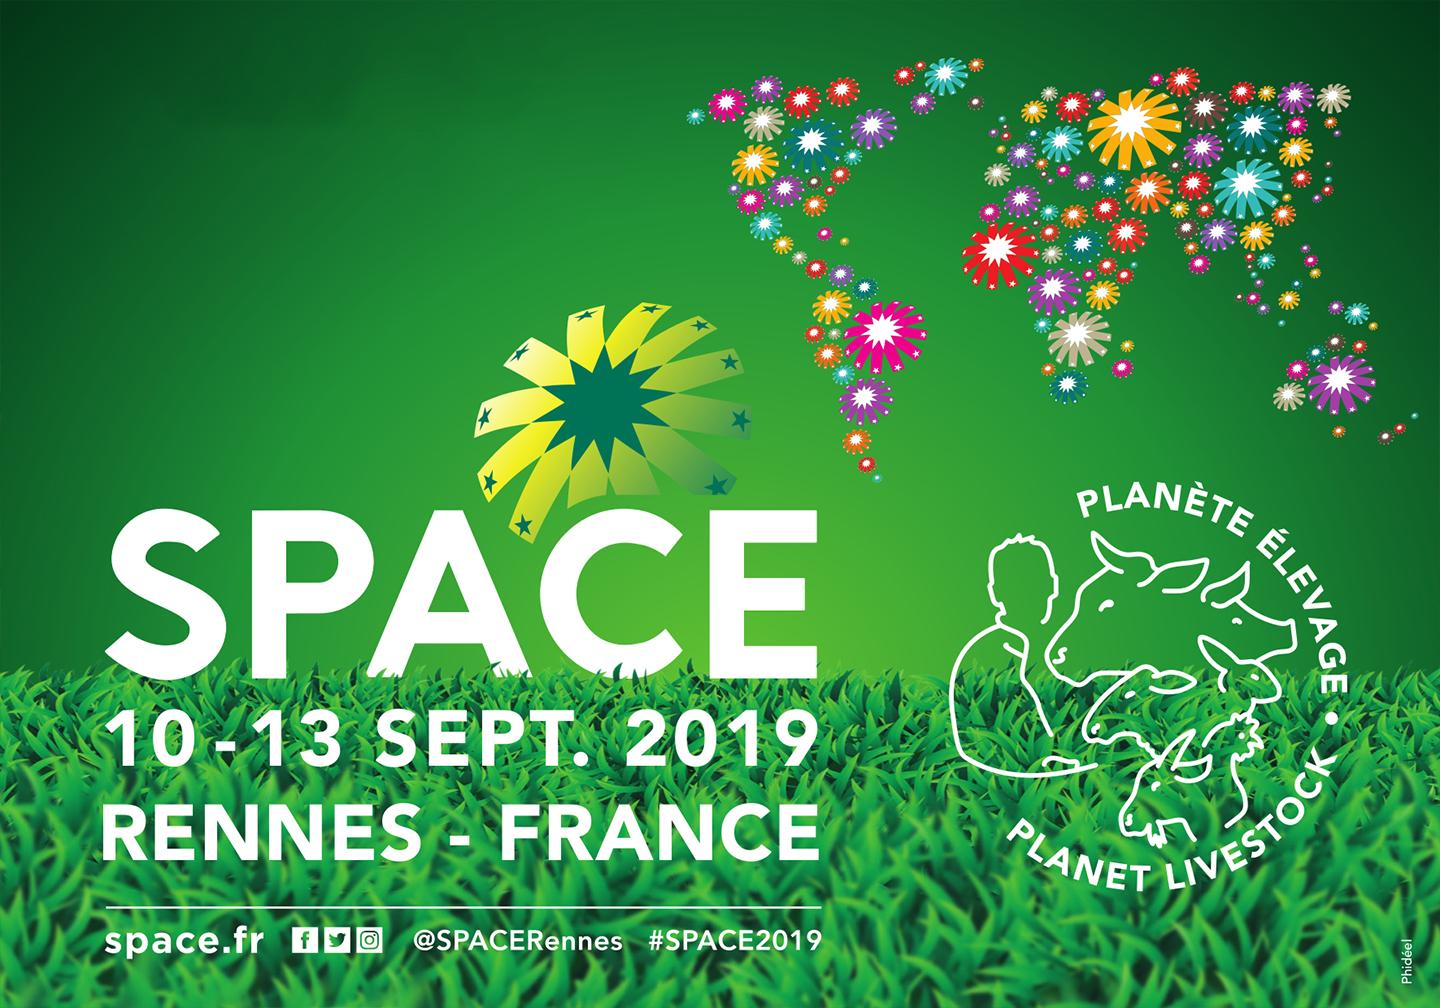 space-exhibition-france-2019